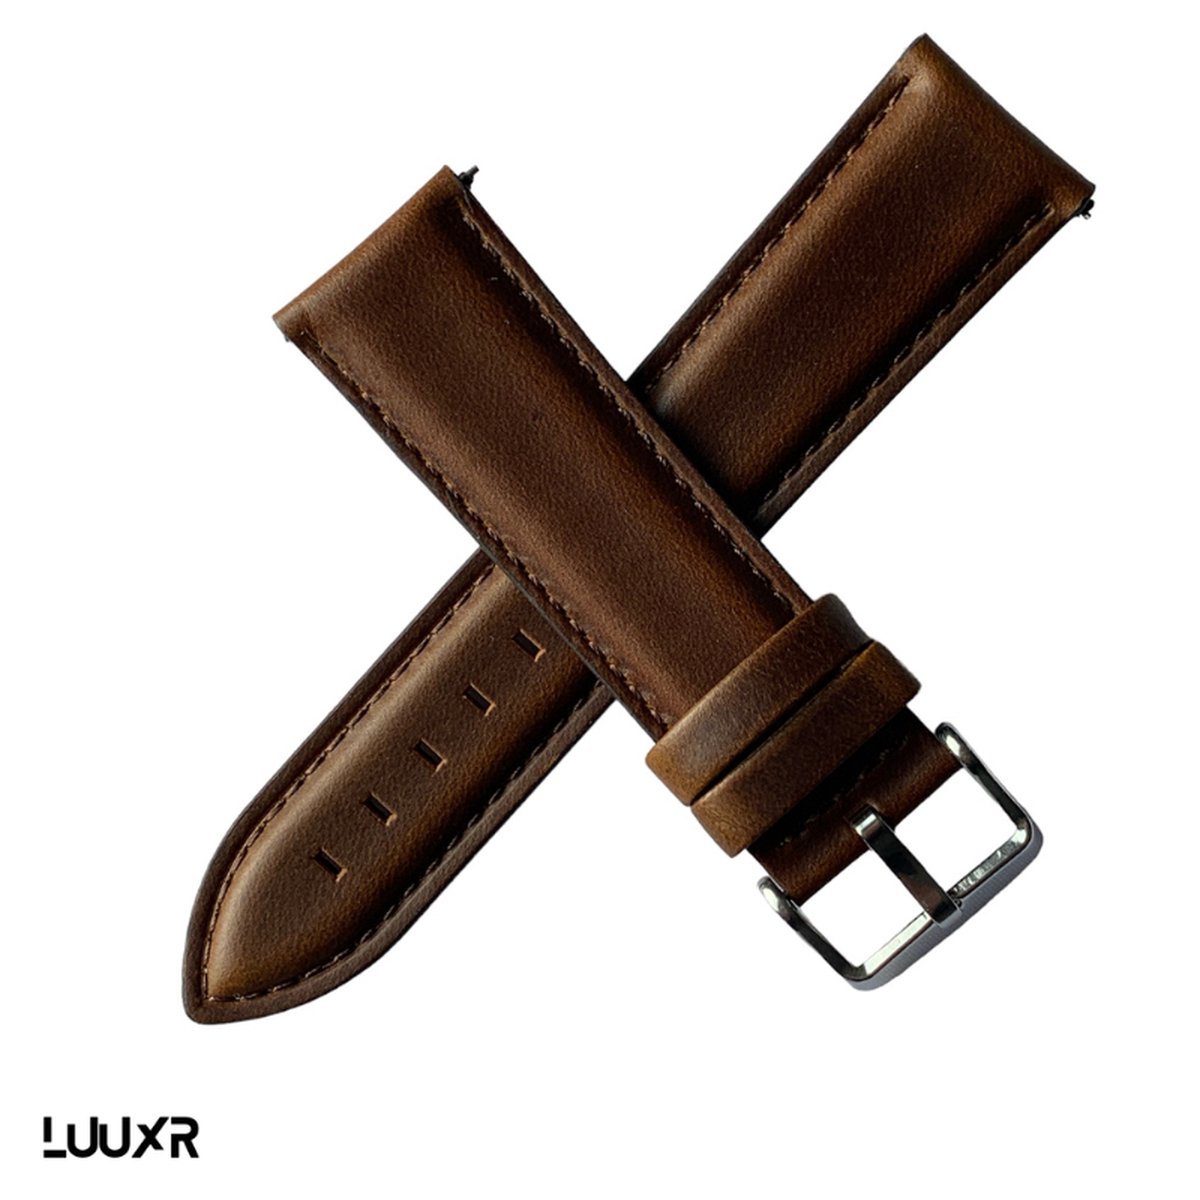 Luuxr strap leather brown smooth luxury 22mm lubrsml220001